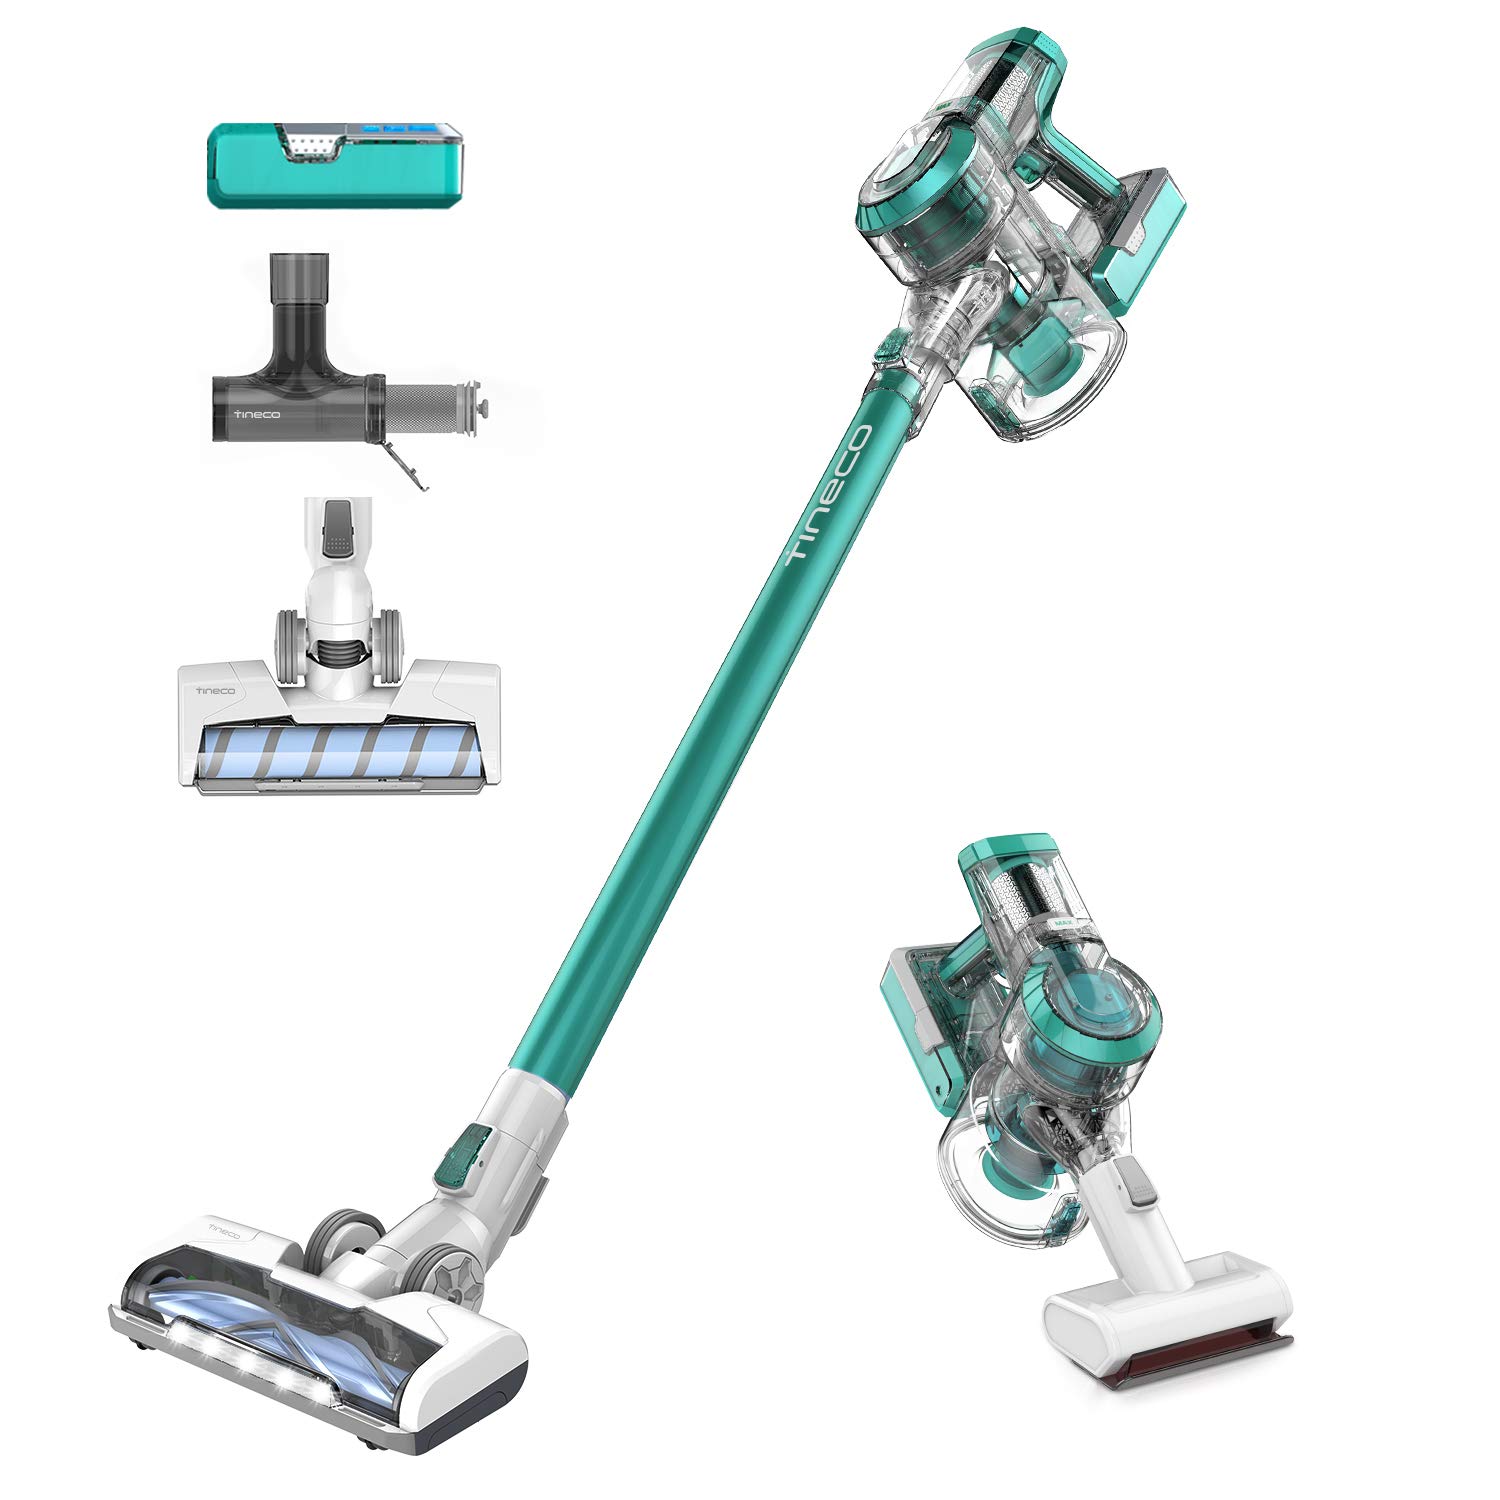 Stick Vacuum Cleaner Tineco A11 Master+ Cordless Lightweight Stick & Hand Vacuum Cleaner $259